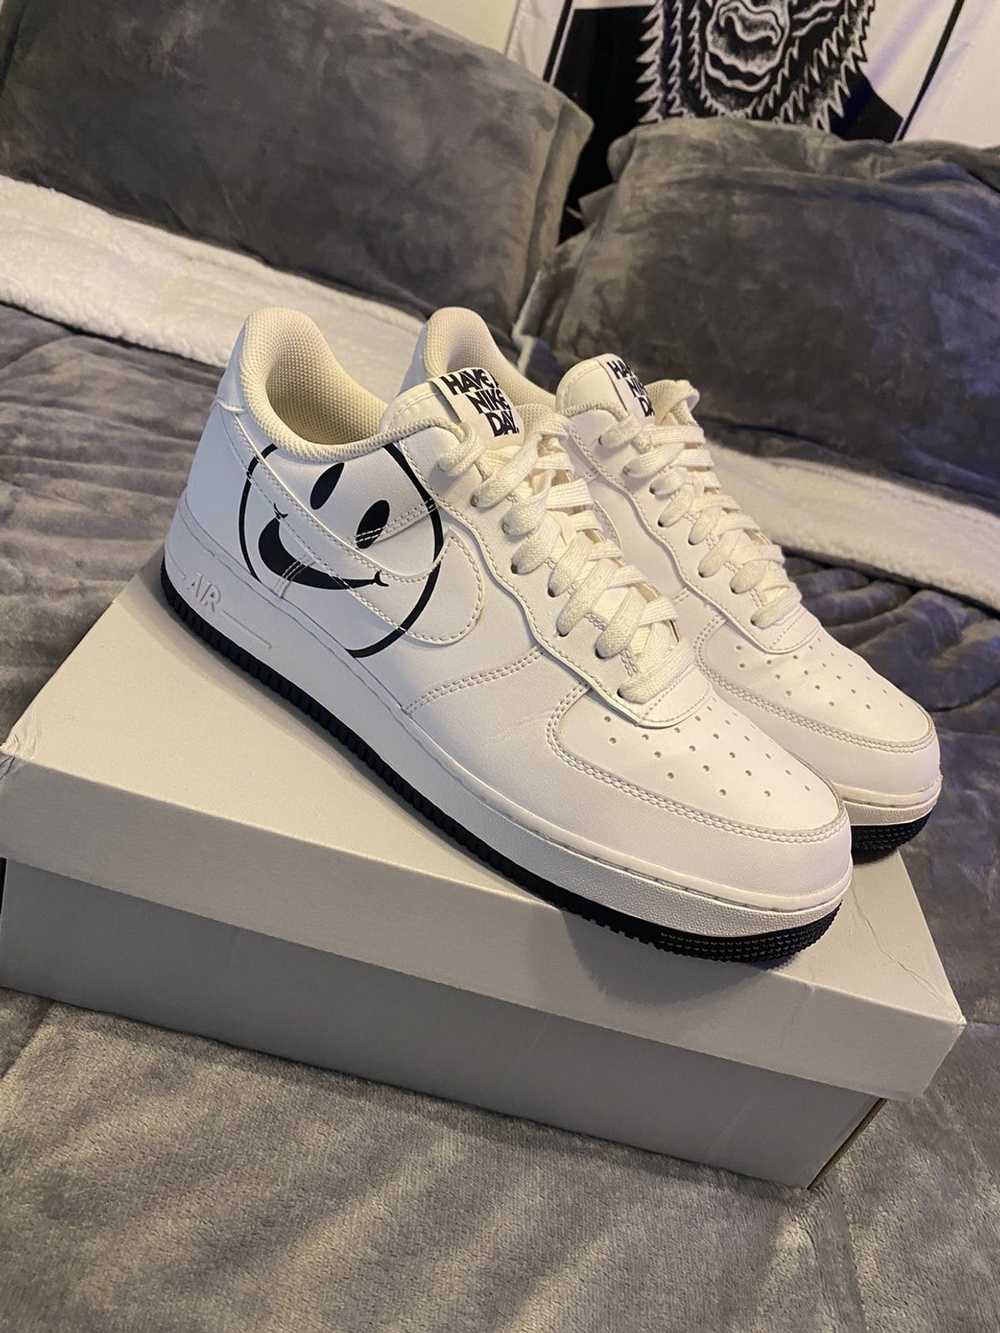 Nike Air Force 1 Low Have a Nike Day - White 2019 - image 4